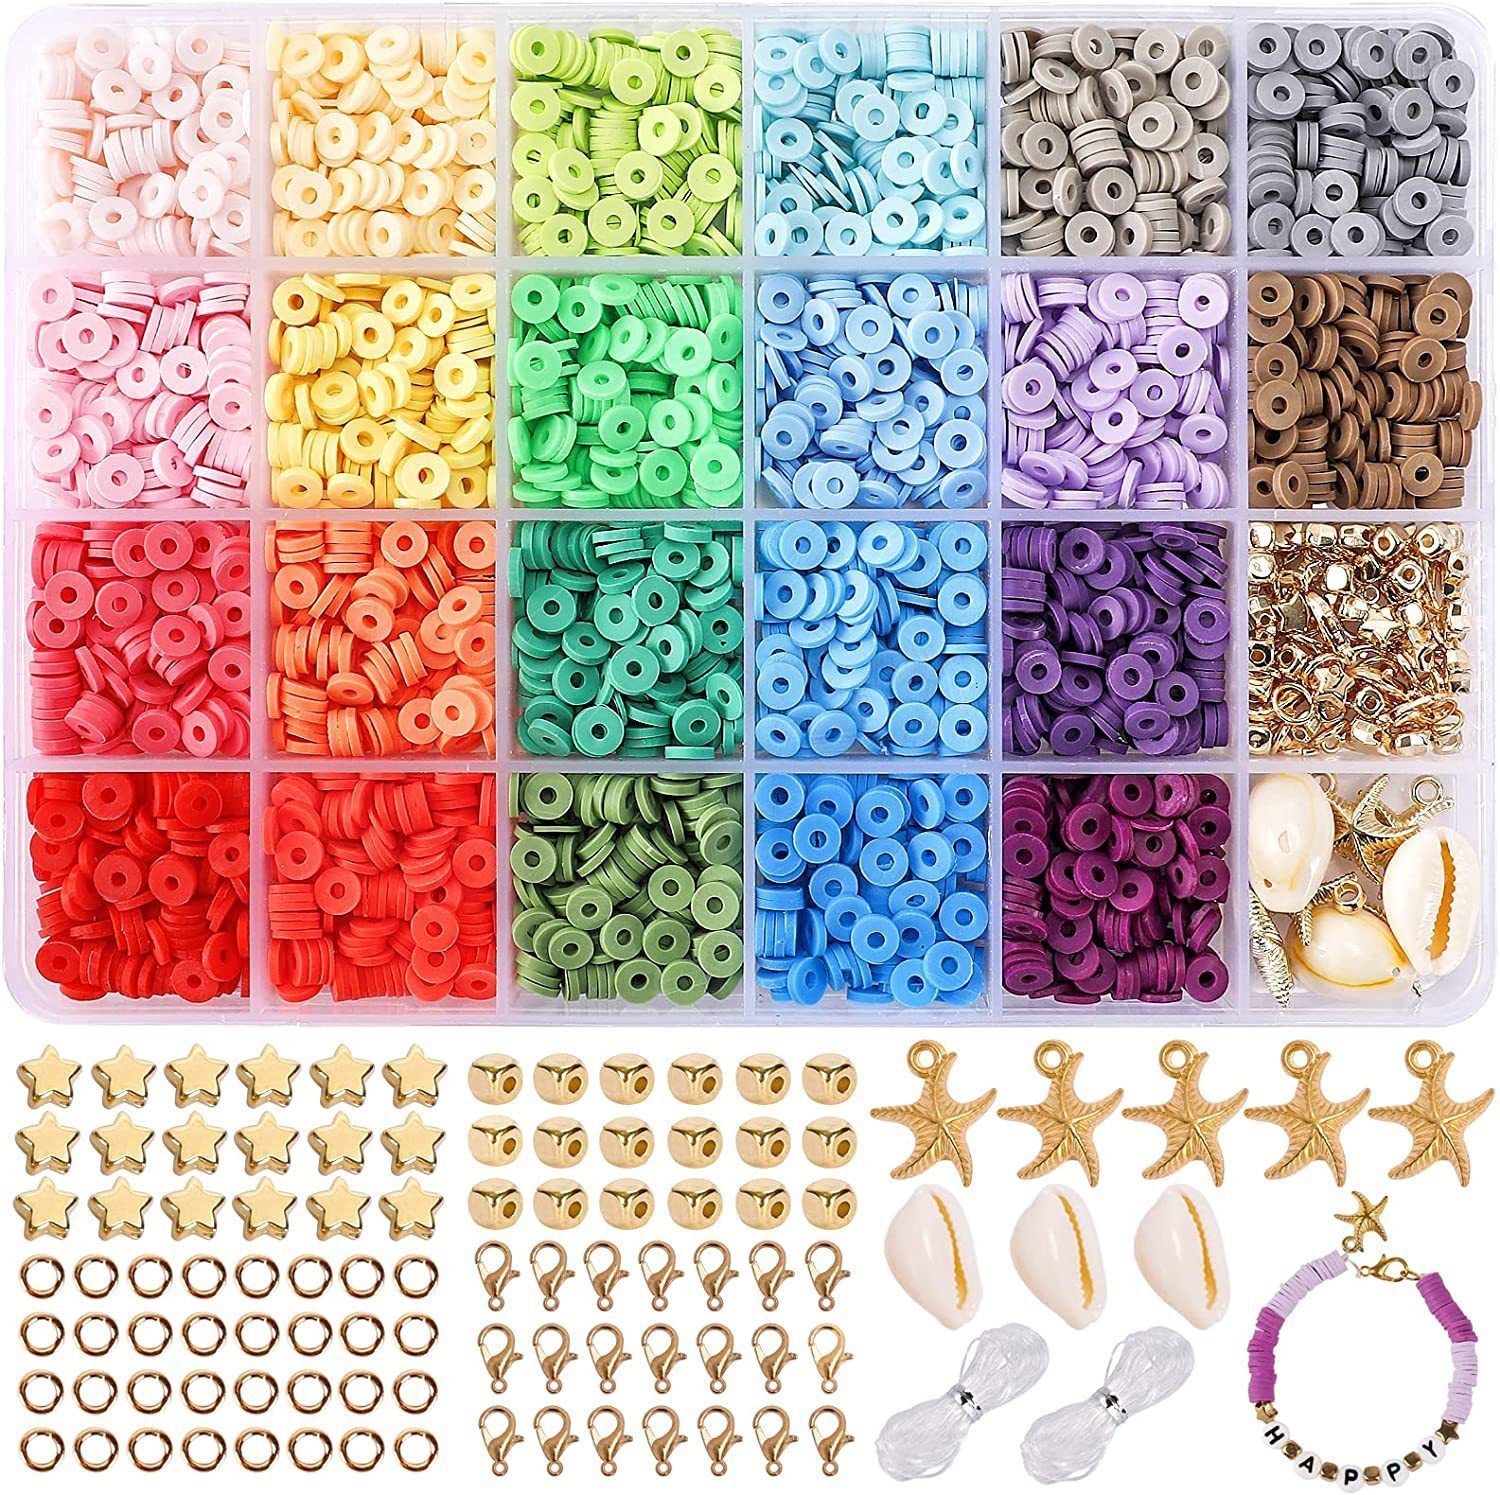 Acrylic Plastic Lucite 6MM Polymer Clay Beads Set Fashion Clay Flat Chips  For Bracelet Making Mixed Clay Beads Accessories Kit DIY Jewelry Making Set  230809 From Ping05, $10.82